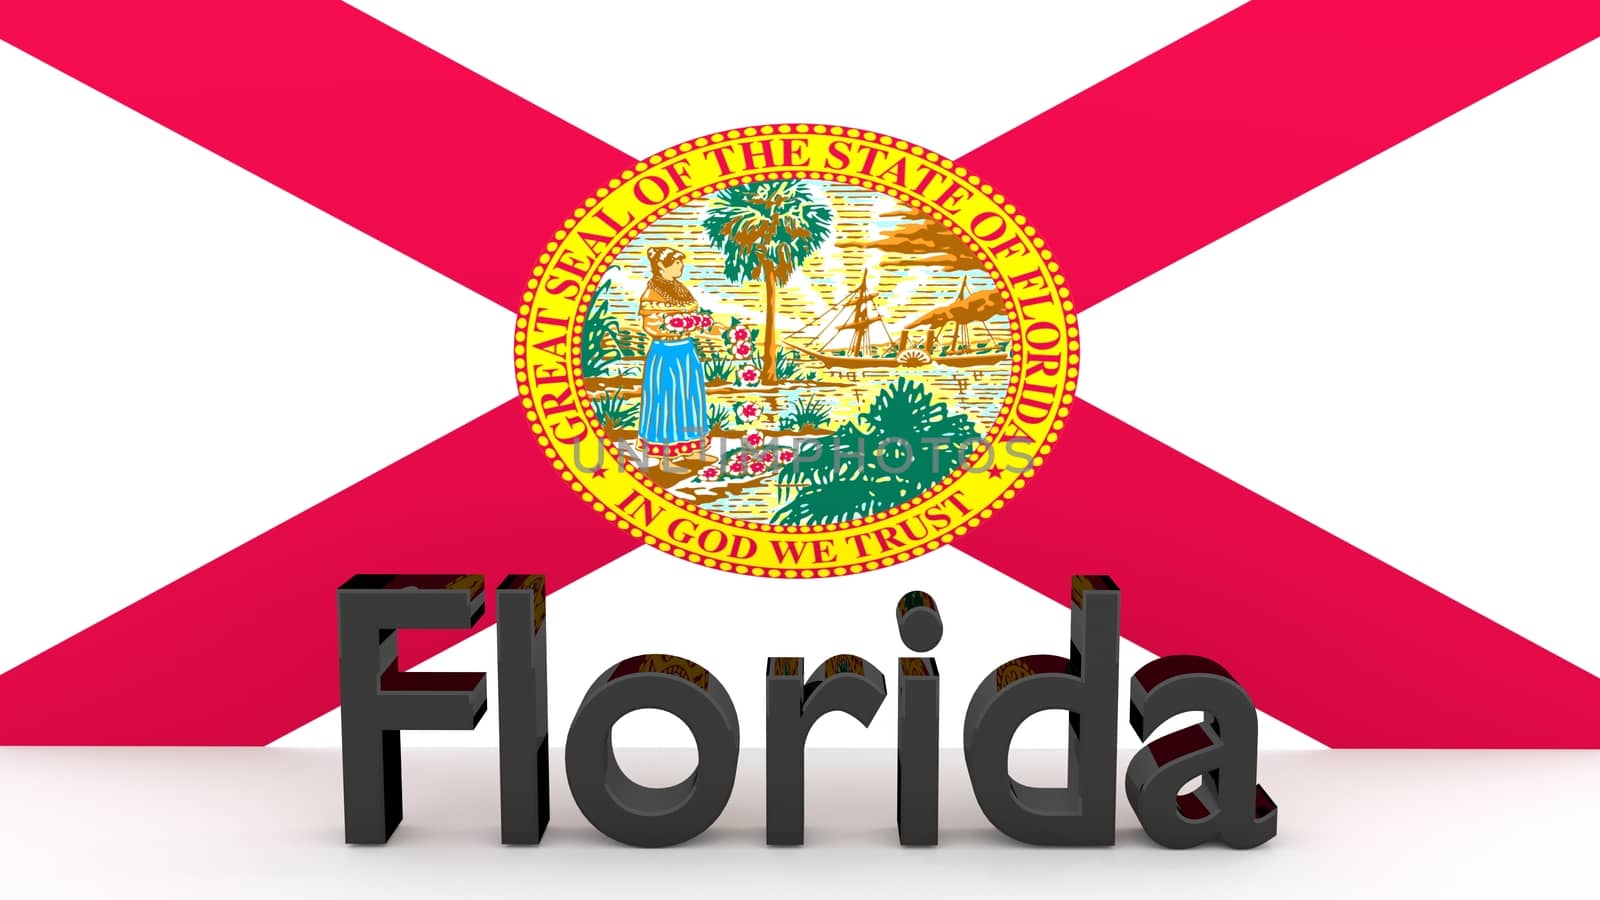 US state Florida, metal name in front of flag by MarkDw